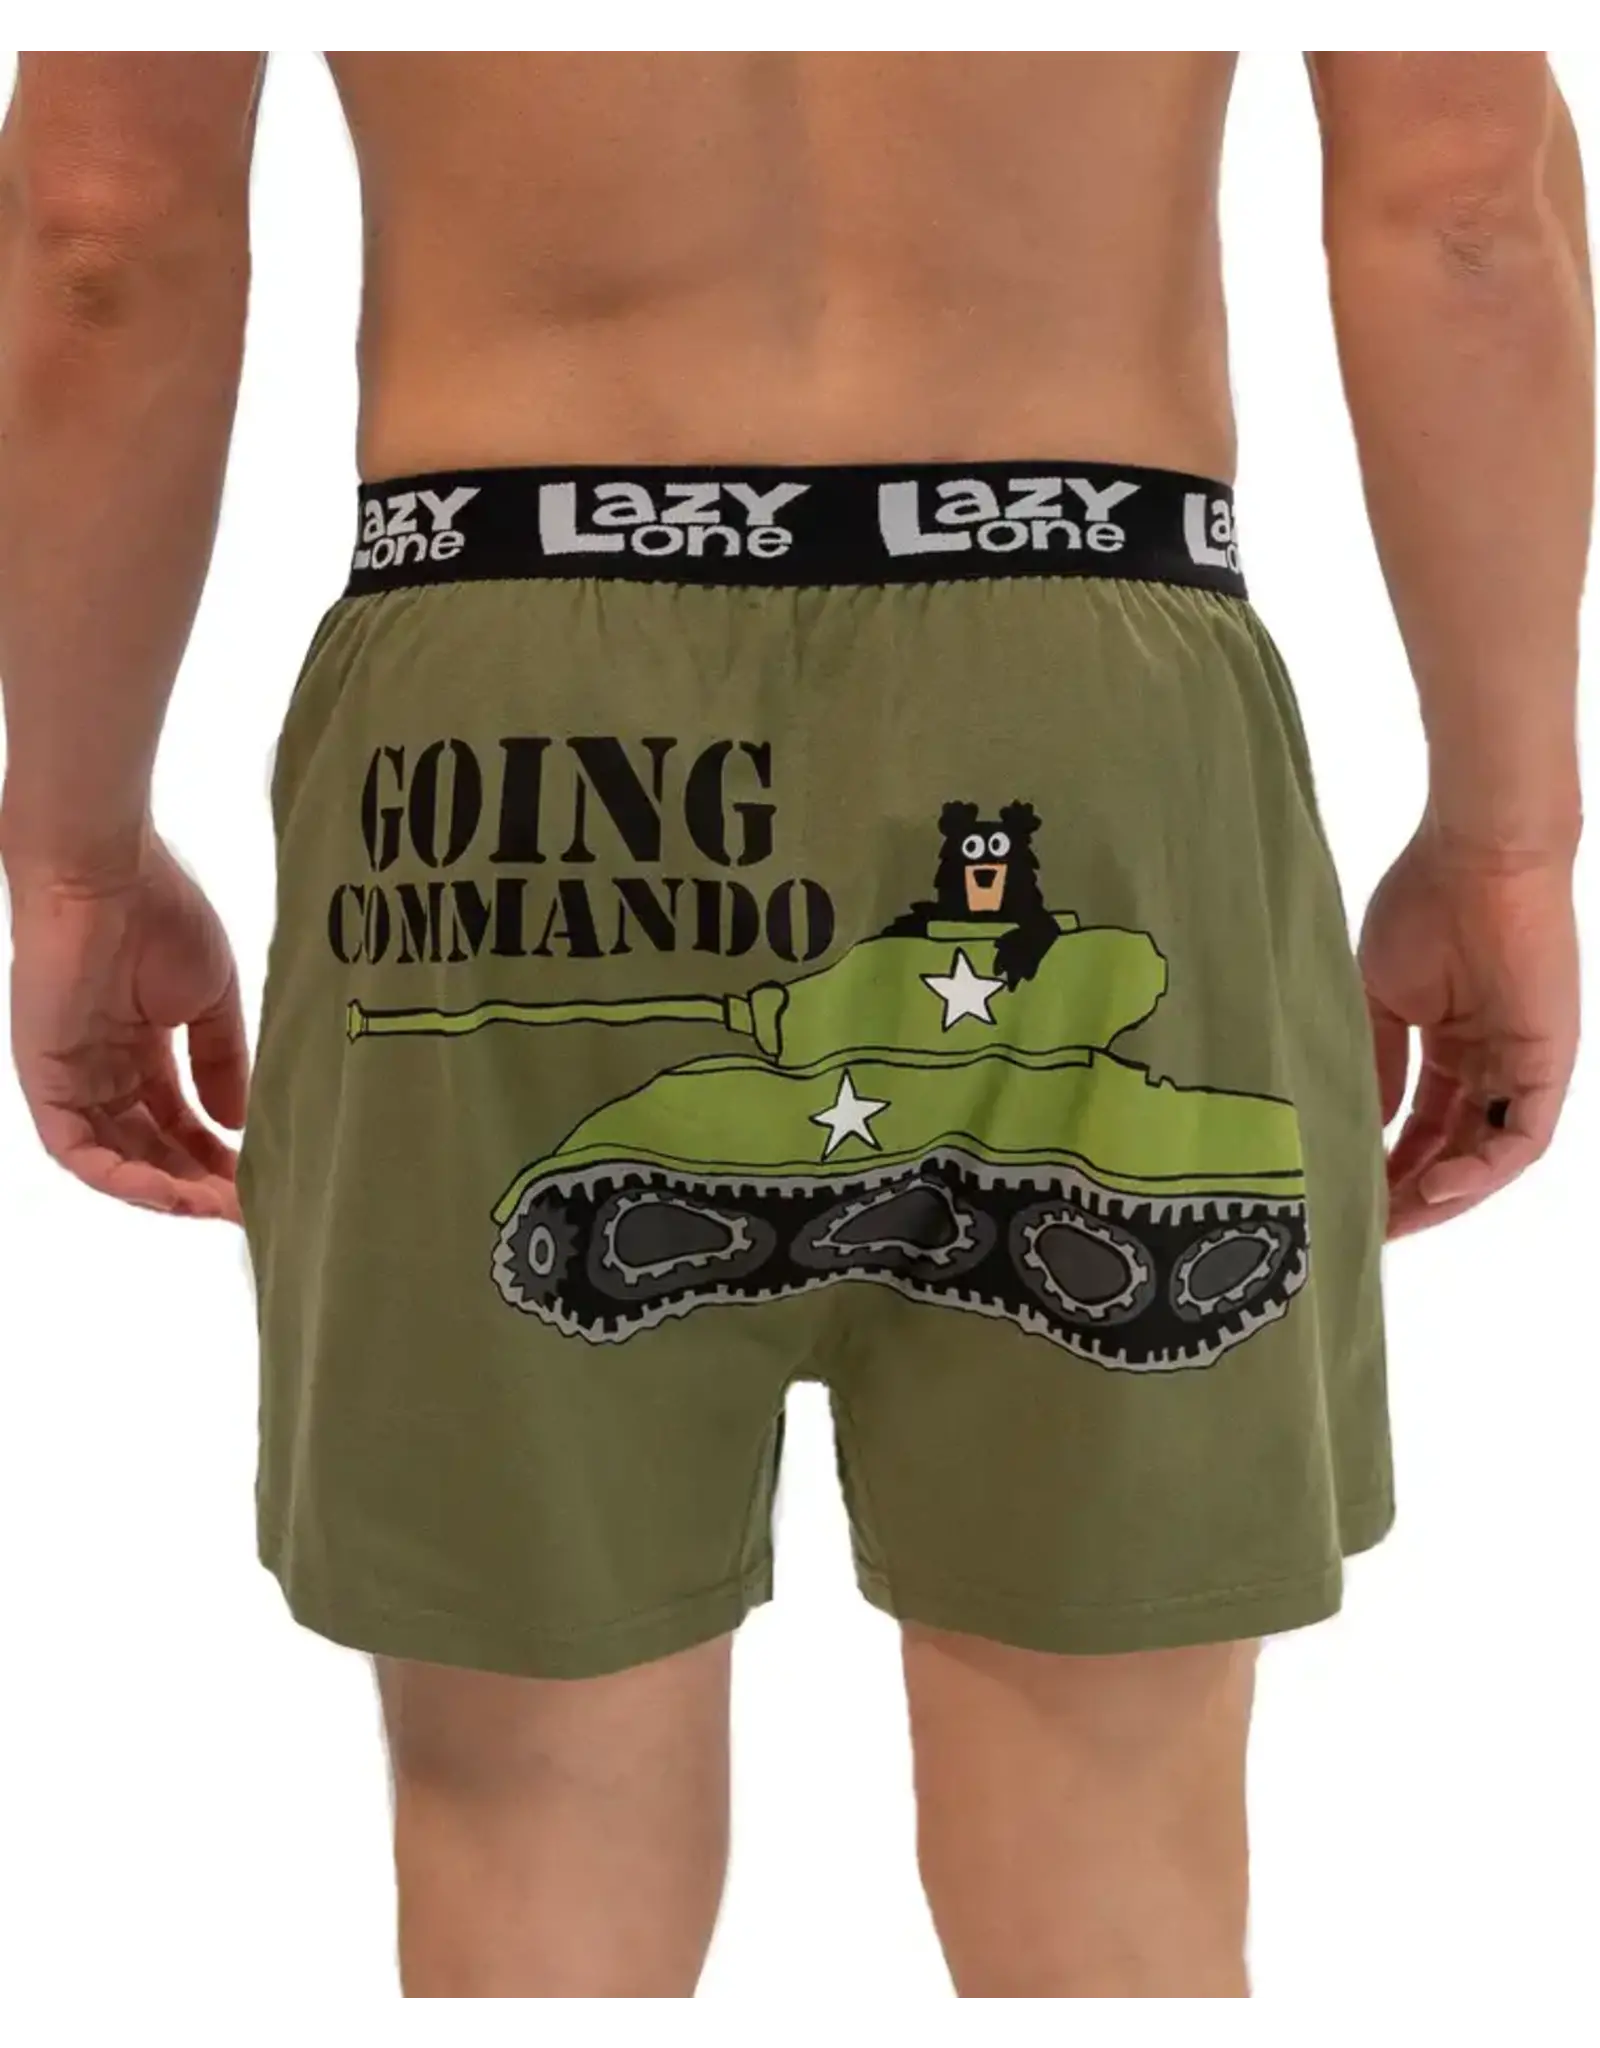 LazyOne Funny Animal Boxers, Skid Marks, Humorous Underwear, Gag Gifts for  Men (Large) 